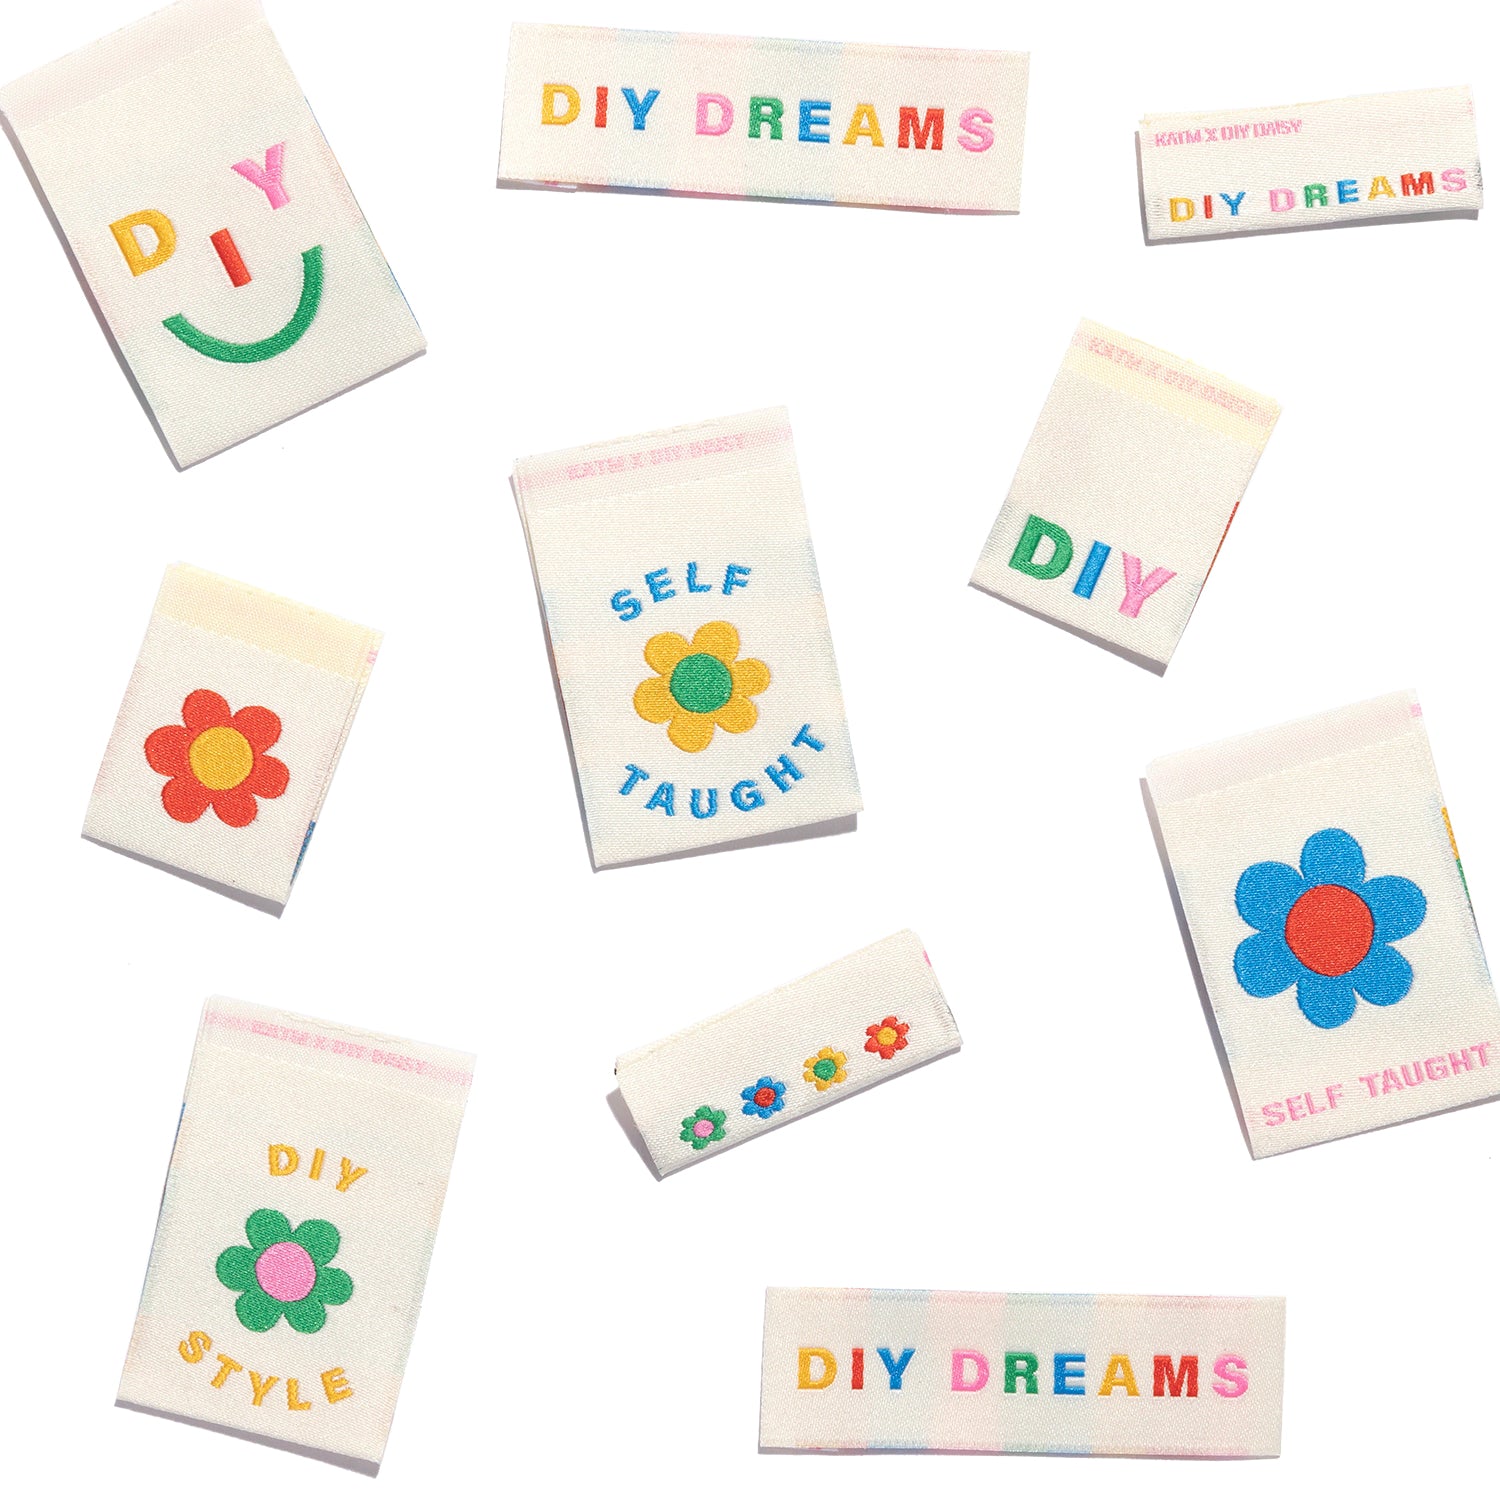 'DIY Dreams' DIY Daisy x Kylie And The Machine Labels Multi Pack